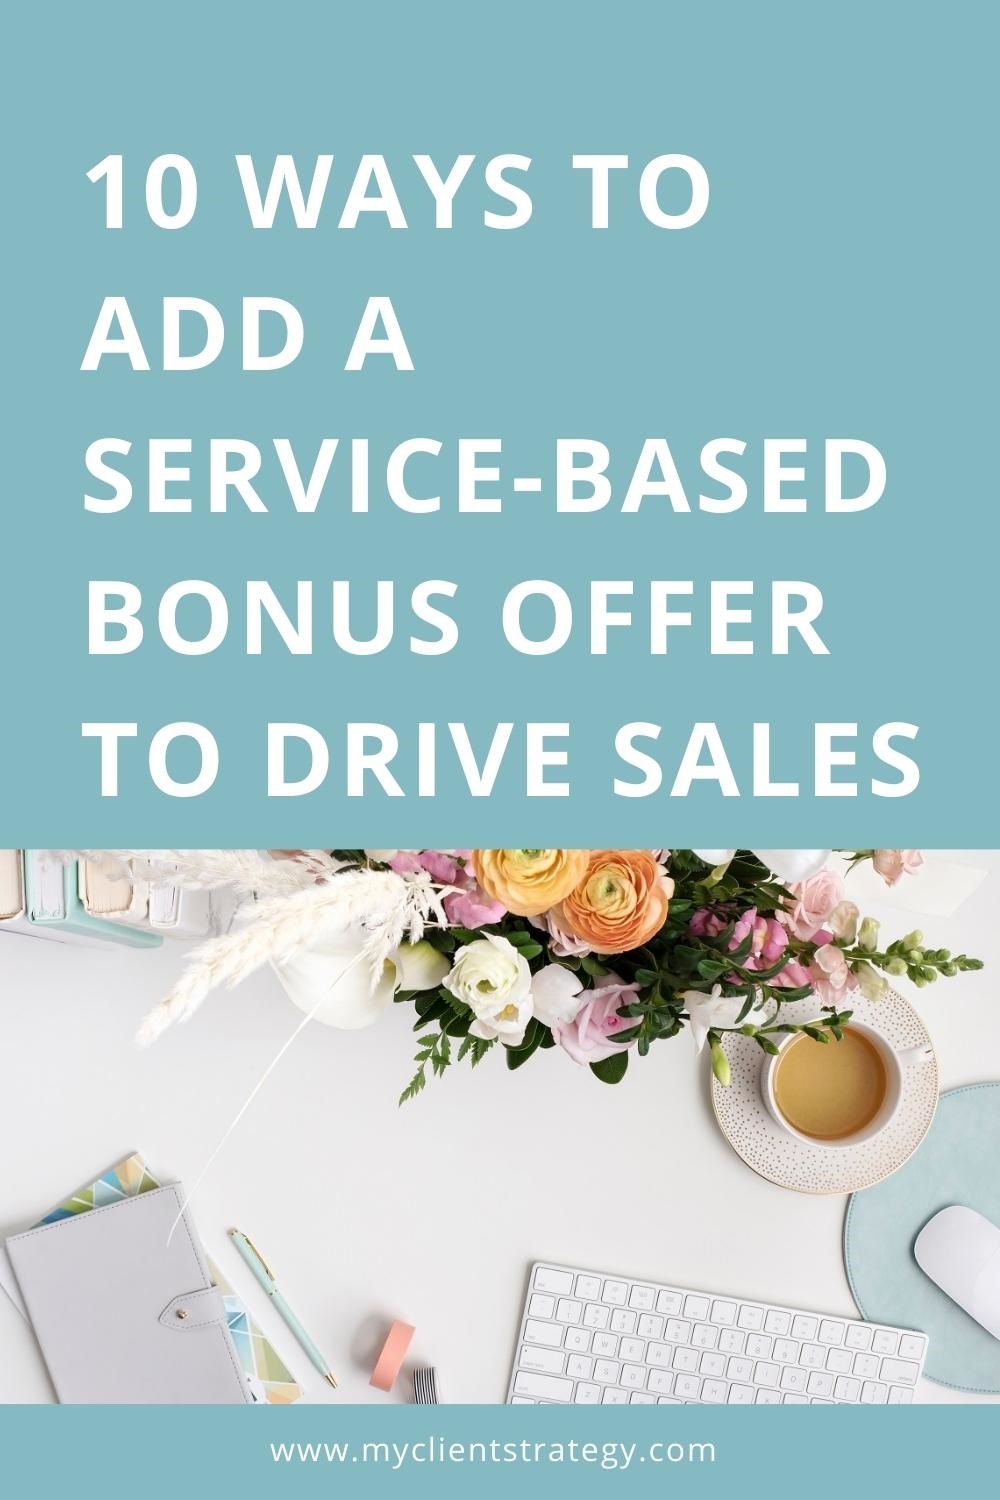 10 Ways to add a service-based bonus offer to drive sales